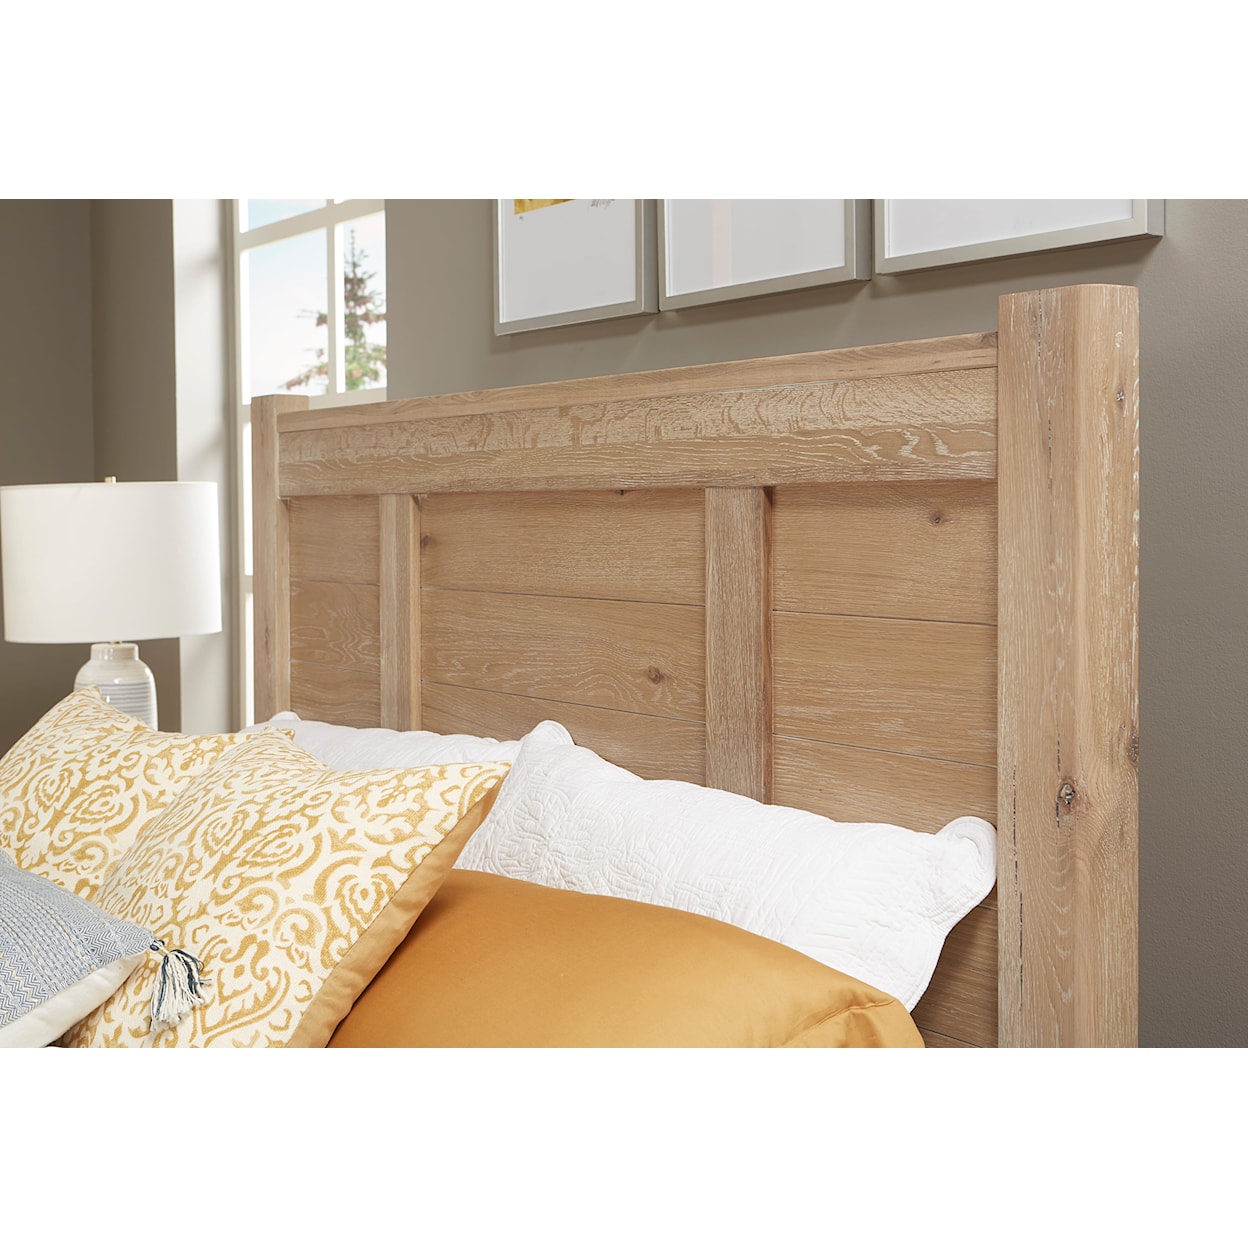 Vaughan Bassett Crafted Oak - Bleached White California King Poster Bed